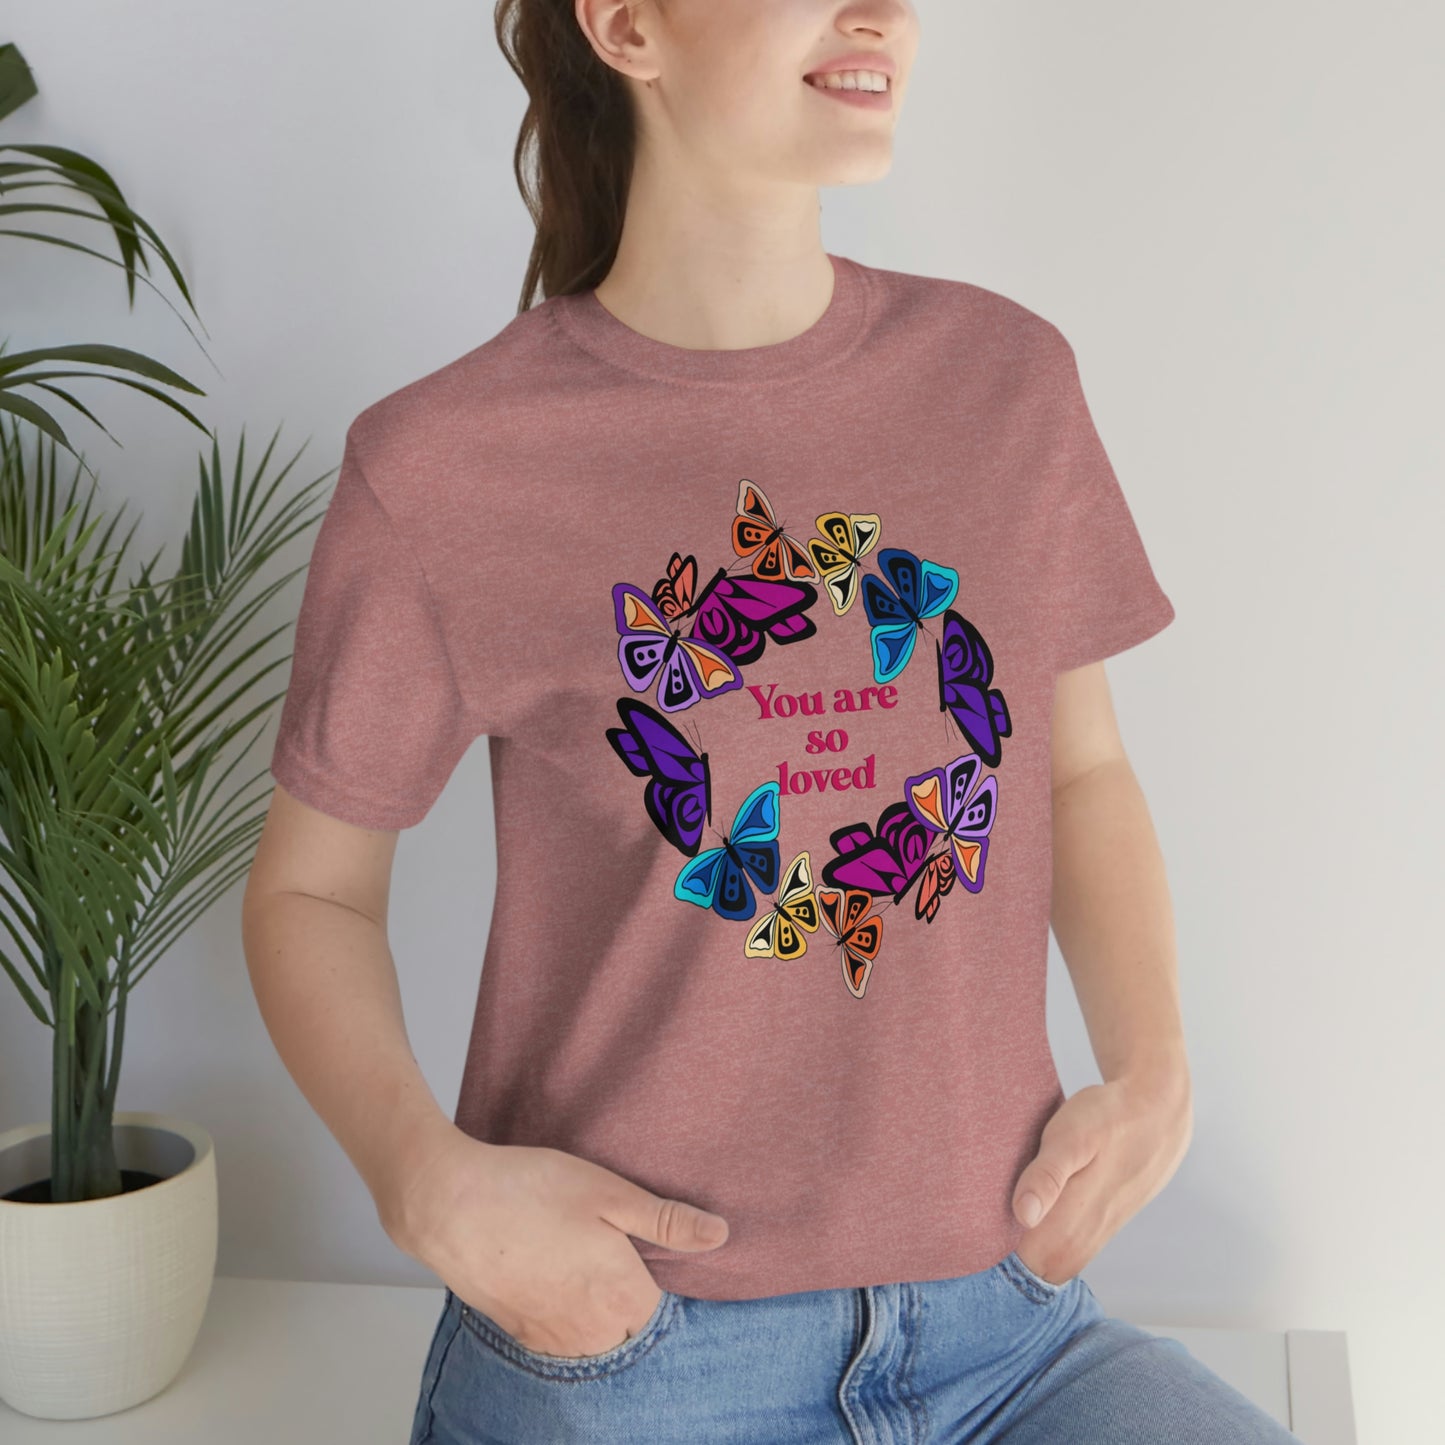 You are so Loved Tshirt Indigenous Butterflies Native American Design